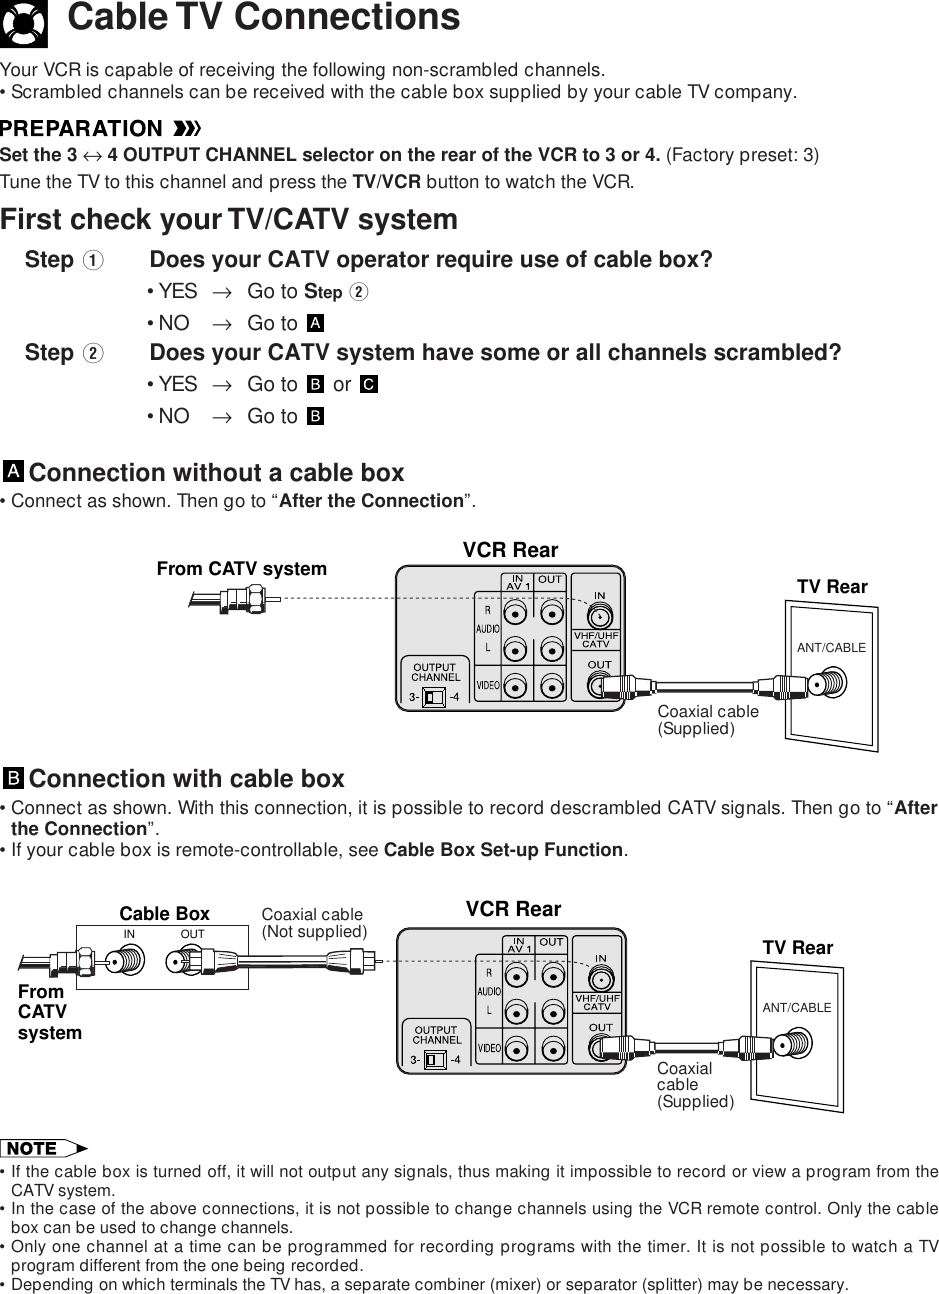 Cable TV ConnectionsYour VCR is capable of receiving the following non-scrambled channels.•Scrambled channels can be received with the cable box supplied by your cable TV company.Set the 3 ↔ 4 OUTPUT CHANNEL selector on the rear of the VCR to 3 or 4. (Factory preset: 3)Tune the TV to this channel and press the TV/VCR button to watch the VCR.First check your TV/CATV system    Step QDoes your CATV operator require use of cable box?•YES →Go to Step W•NO →Go to     Step WDoes your CATV system have some or all channels scrambled?•YES →Go to   or •NO →Go to Connection without a cable box•Connect as shown. Then go to “After the Connection”.ANT/CABLEVCR RearTV RearFrom CATV systemCoaxial cable(Supplied)Connection with cable box•Connect as shown. With this connection, it is possible to record descrambled CATV signals. Then go to “Afterthe Connection”.•If your cable box is remote-controllable, see Cable Box Set-up Function.ANT/CABLEVCR RearCable BoxTV RearOUTINFromCATVsystemCoaxialcable(Supplied)Coaxial cable(Not supplied)•If the cable box is turned off, it will not output any signals, thus making it impossible to record or view a program from theCATV system.•In the case of the above connections, it is not possible to change channels using the VCR remote control. Only the cablebox can be used to change channels.•Only one channel at a time can be programmed for recording programs with the timer. It is not possible to watch a TVprogram different from the one being recorded.•Depending on which terminals the TV has, a separate combiner (mixer) or separator (splitter) may be necessary.